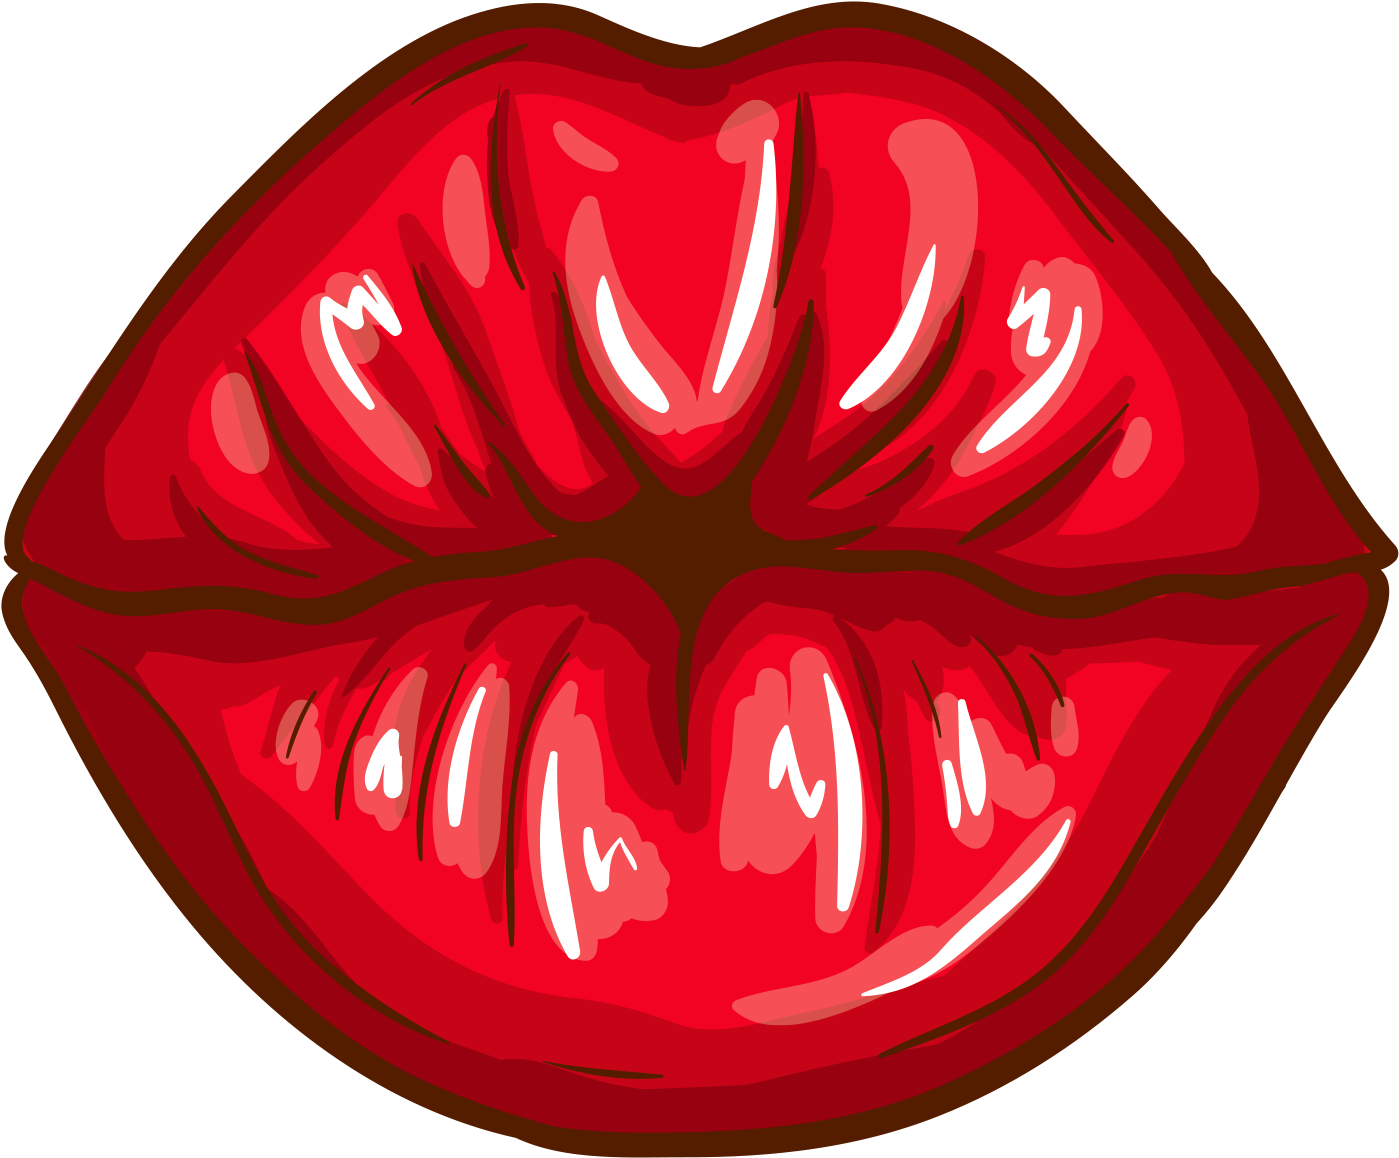 Download 2048 X 2048 1 - Cartoon Lips With Tongue PNG Image with 